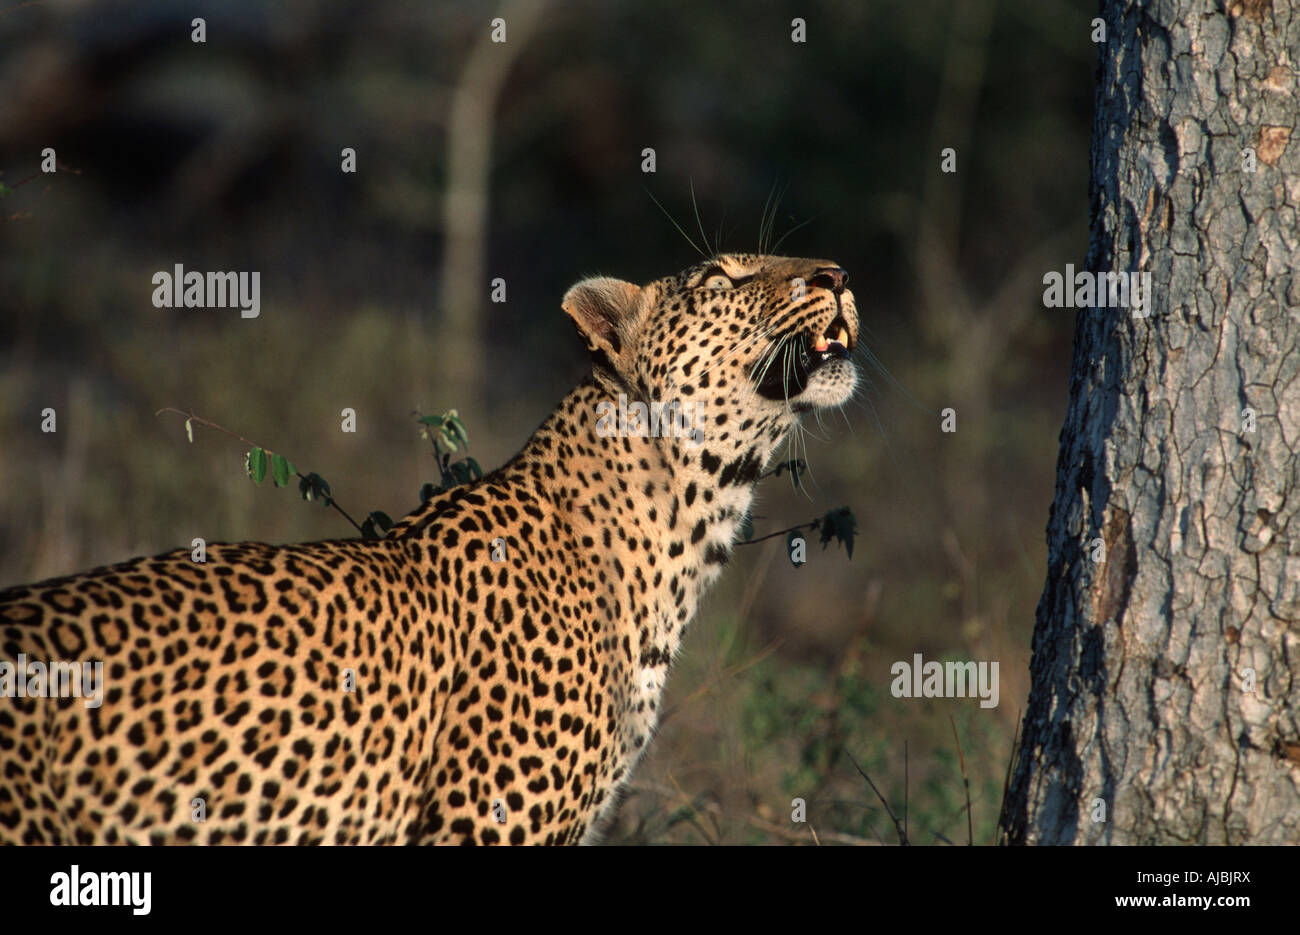 Leopard (Panthera Pardus) Looking Up a Tree Stockfoto